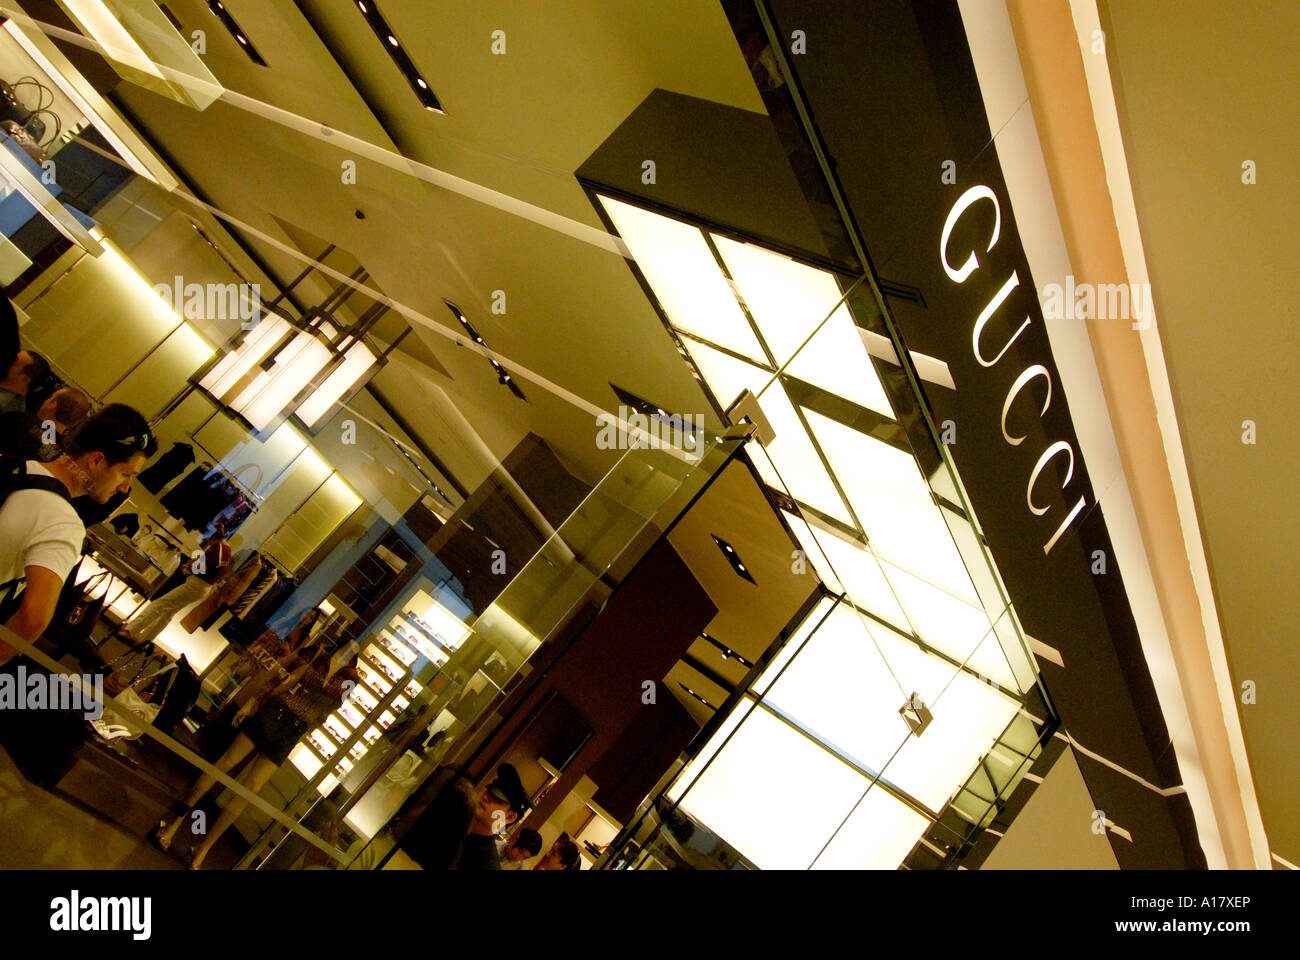 Siamparagon hi-res stock photography and images - Alamy